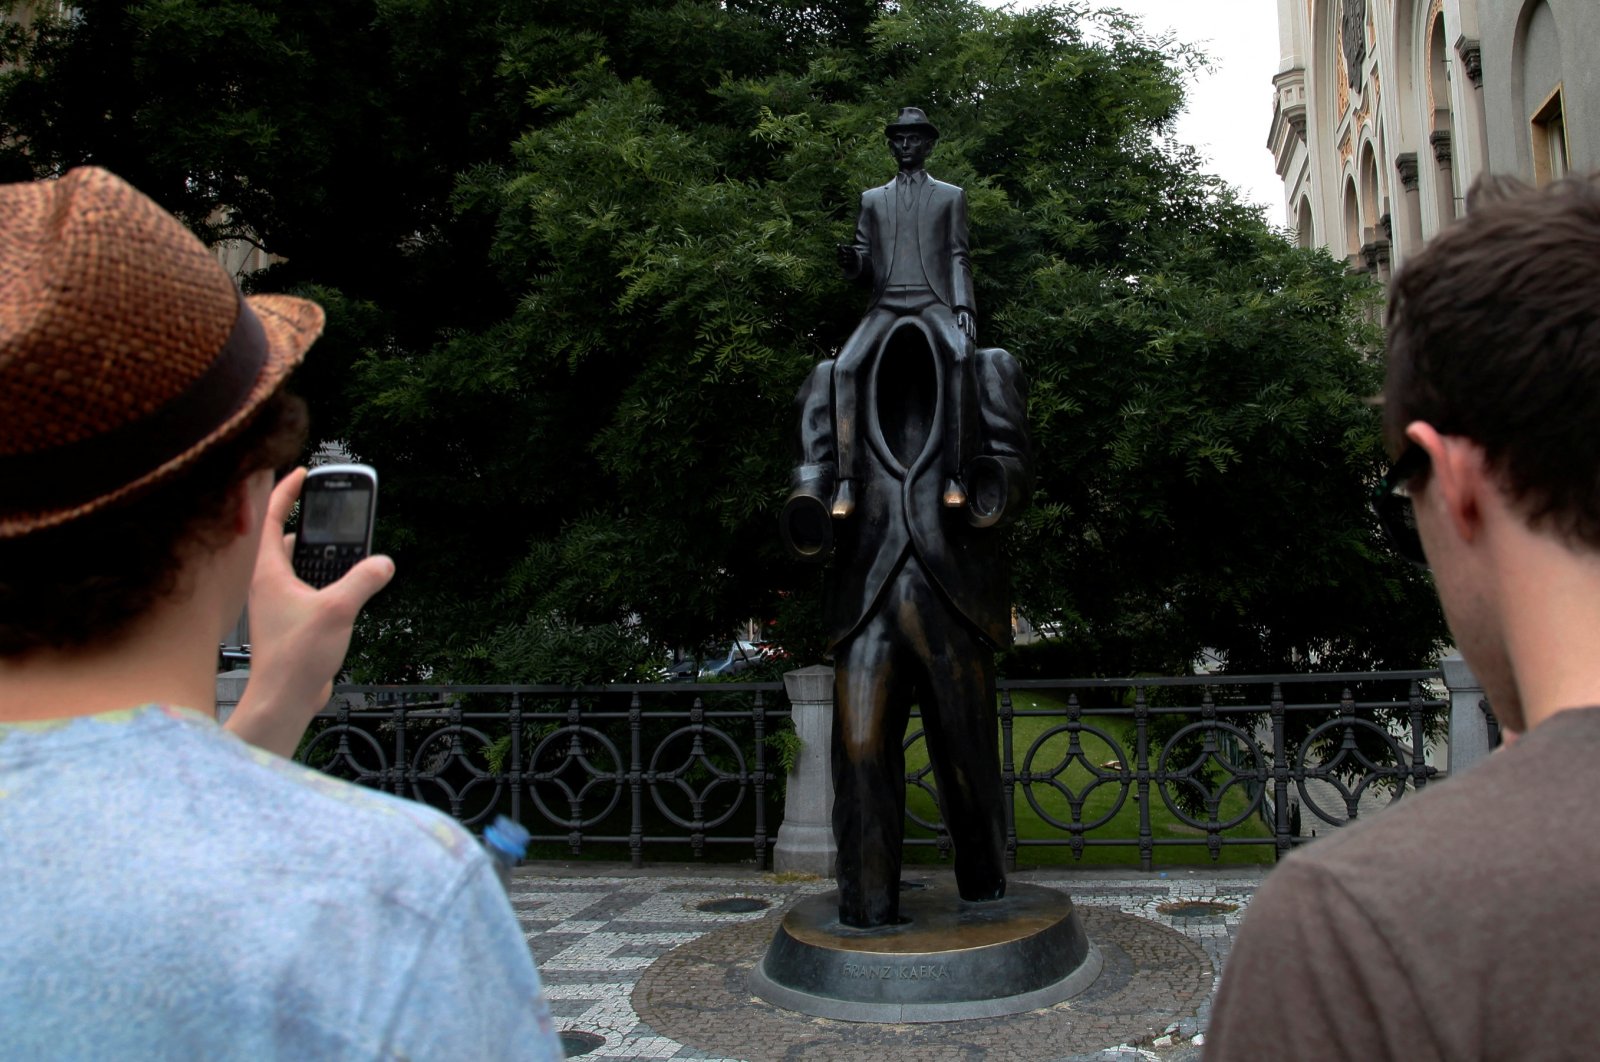 Tourists look at a statue of famous German-language writer Franz Kafka in central Prague, Czechia, July 3, 2013. (Reuters Photo)